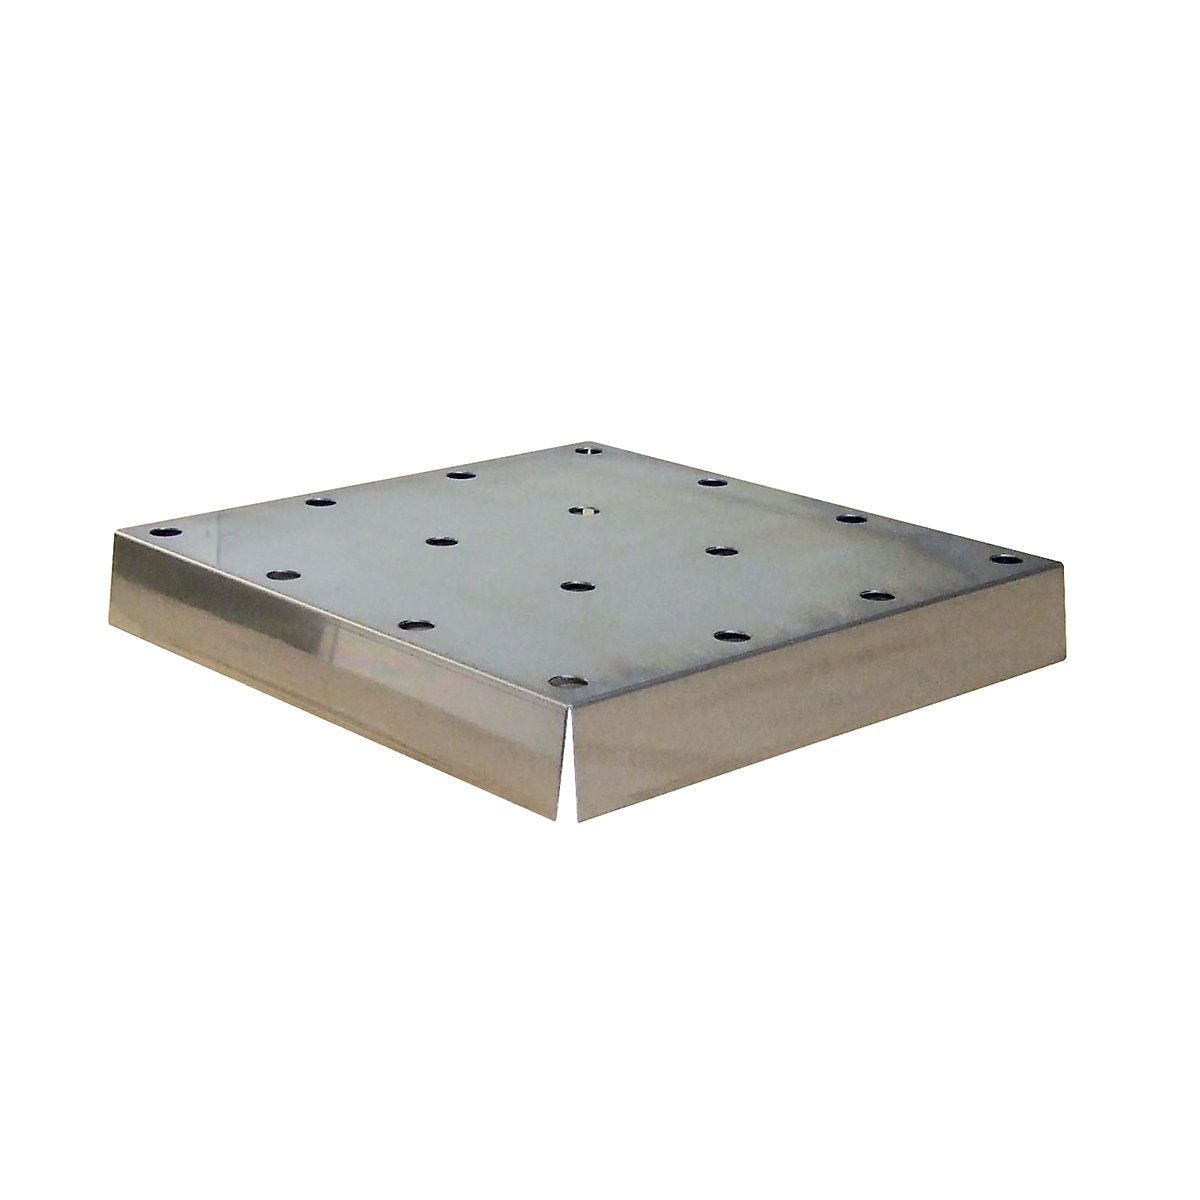 Perforated metal cover for base sump tray – asecos, WxDxH 439 x 420 x 60 mm, stainless steel-2